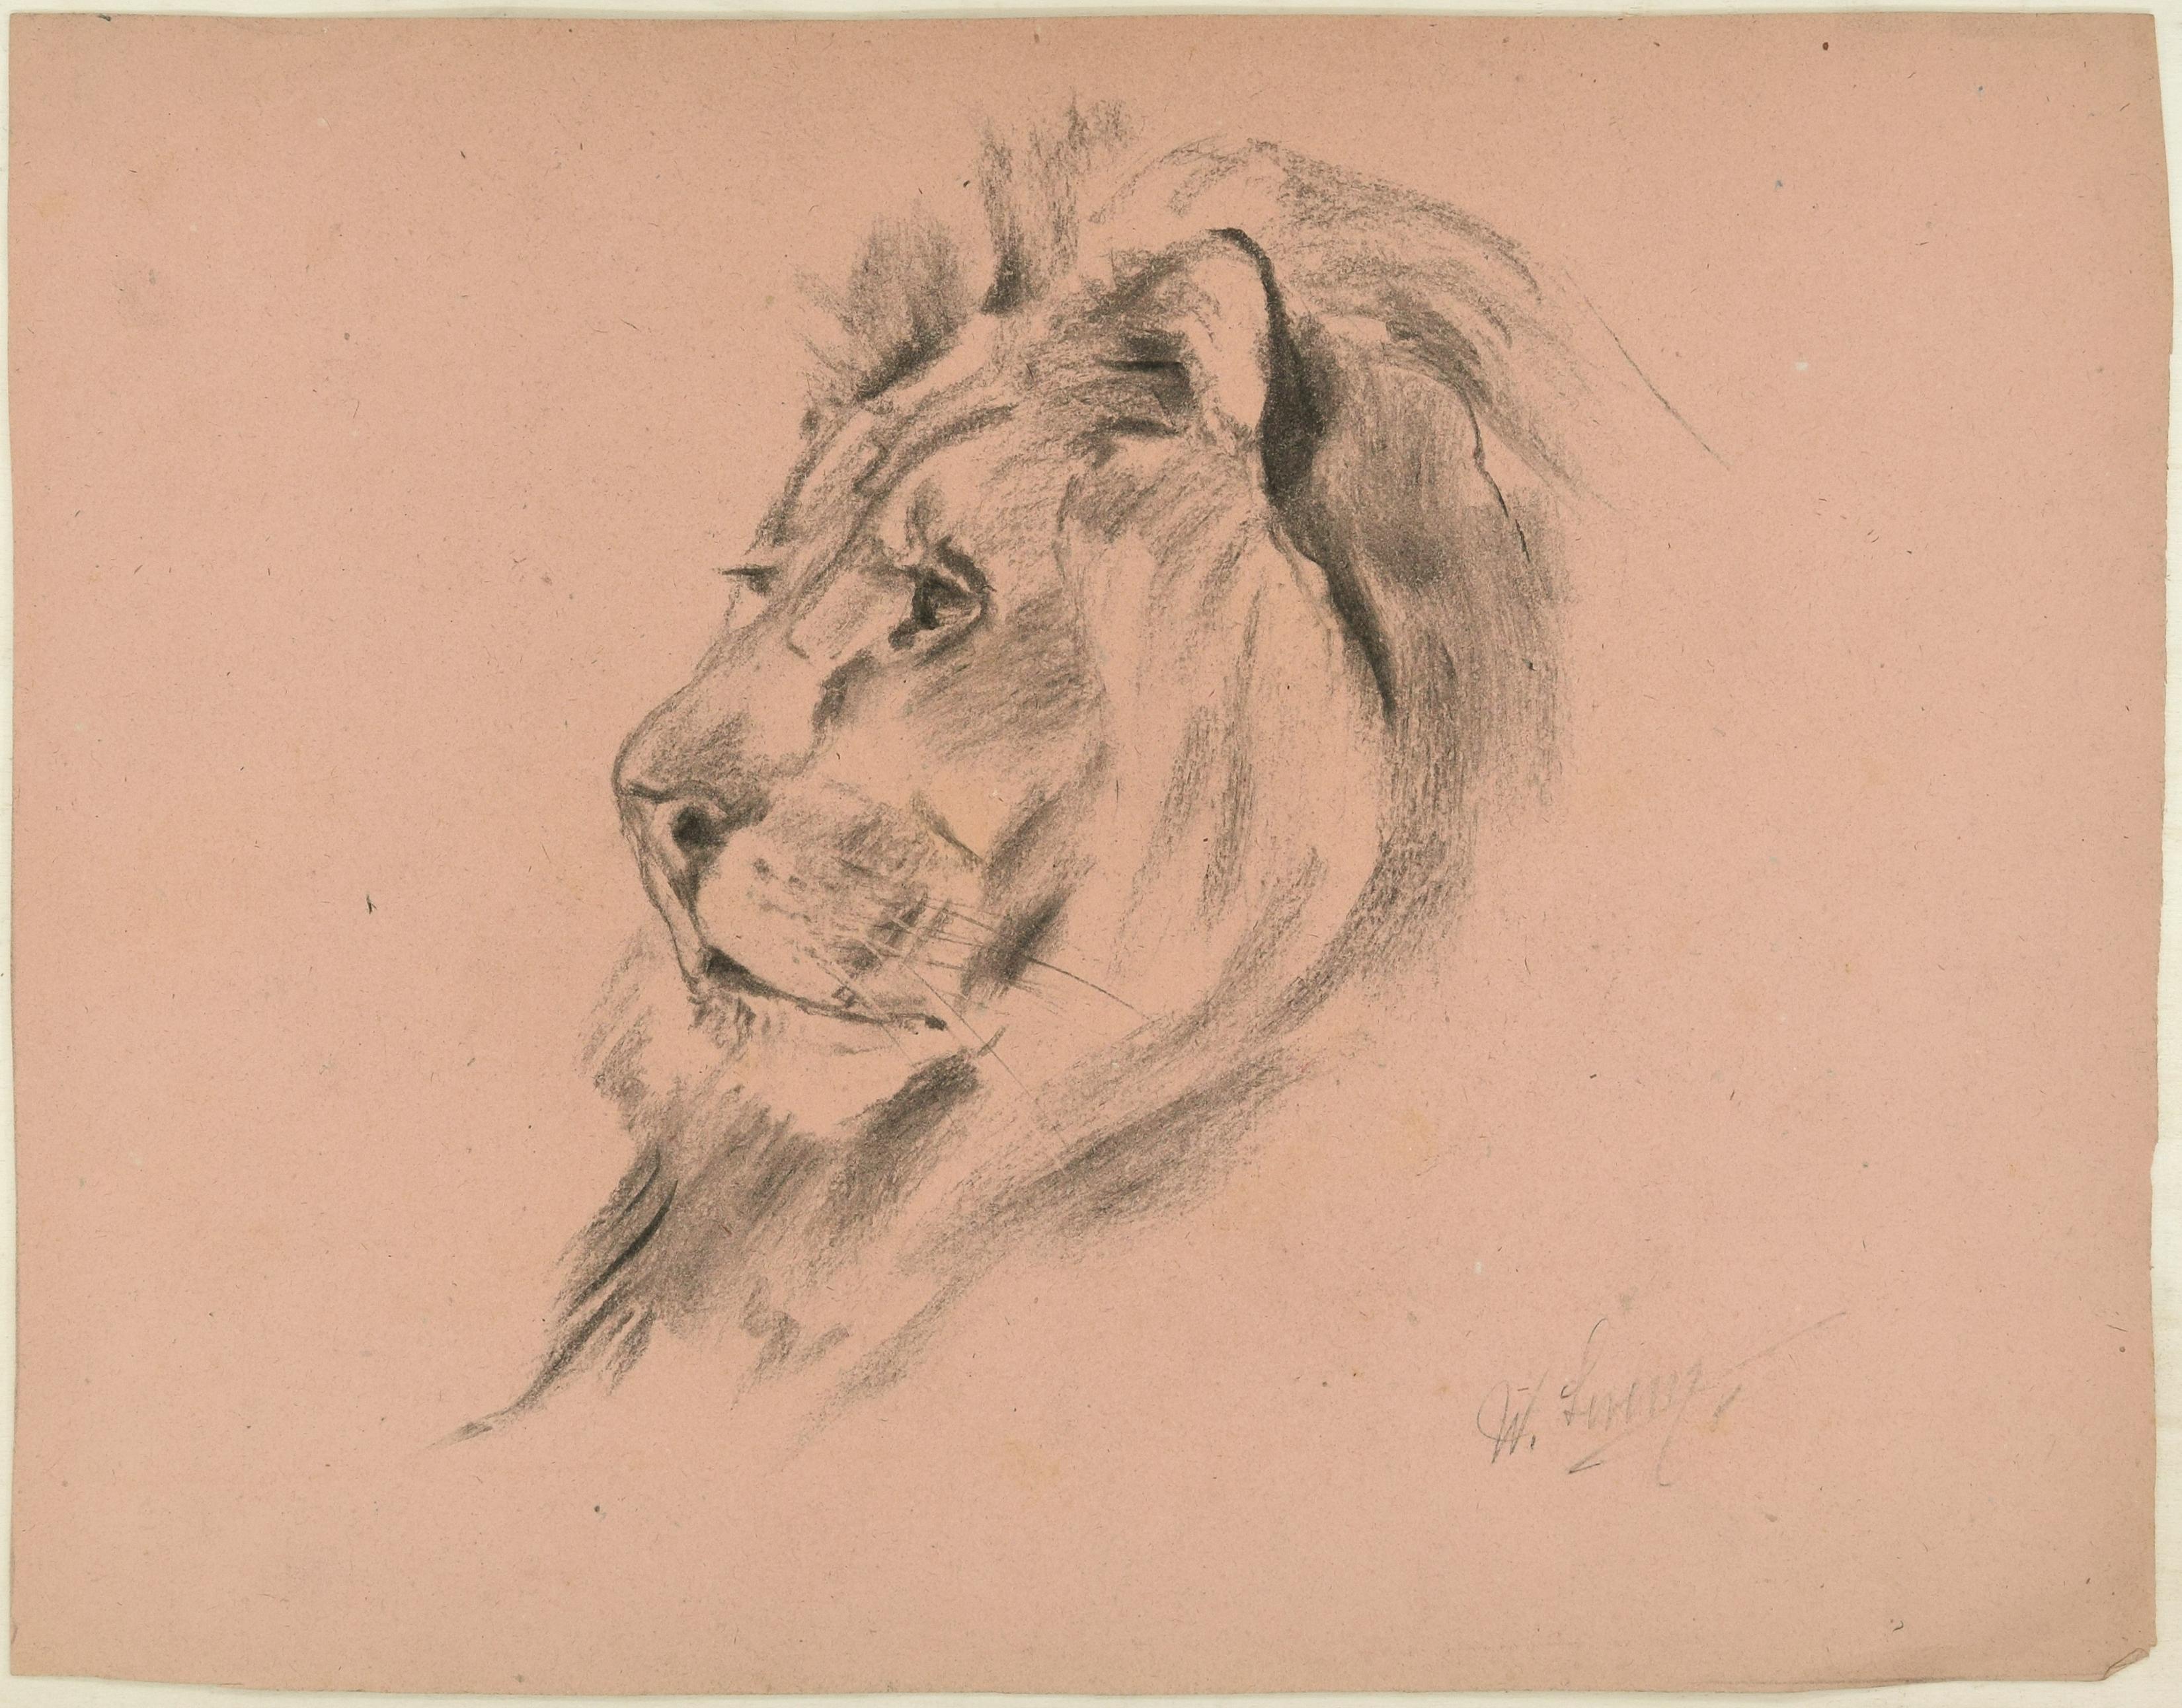 Profile of a Lion - Original Charcoal Drawing by Willy Lorenz - 1940s